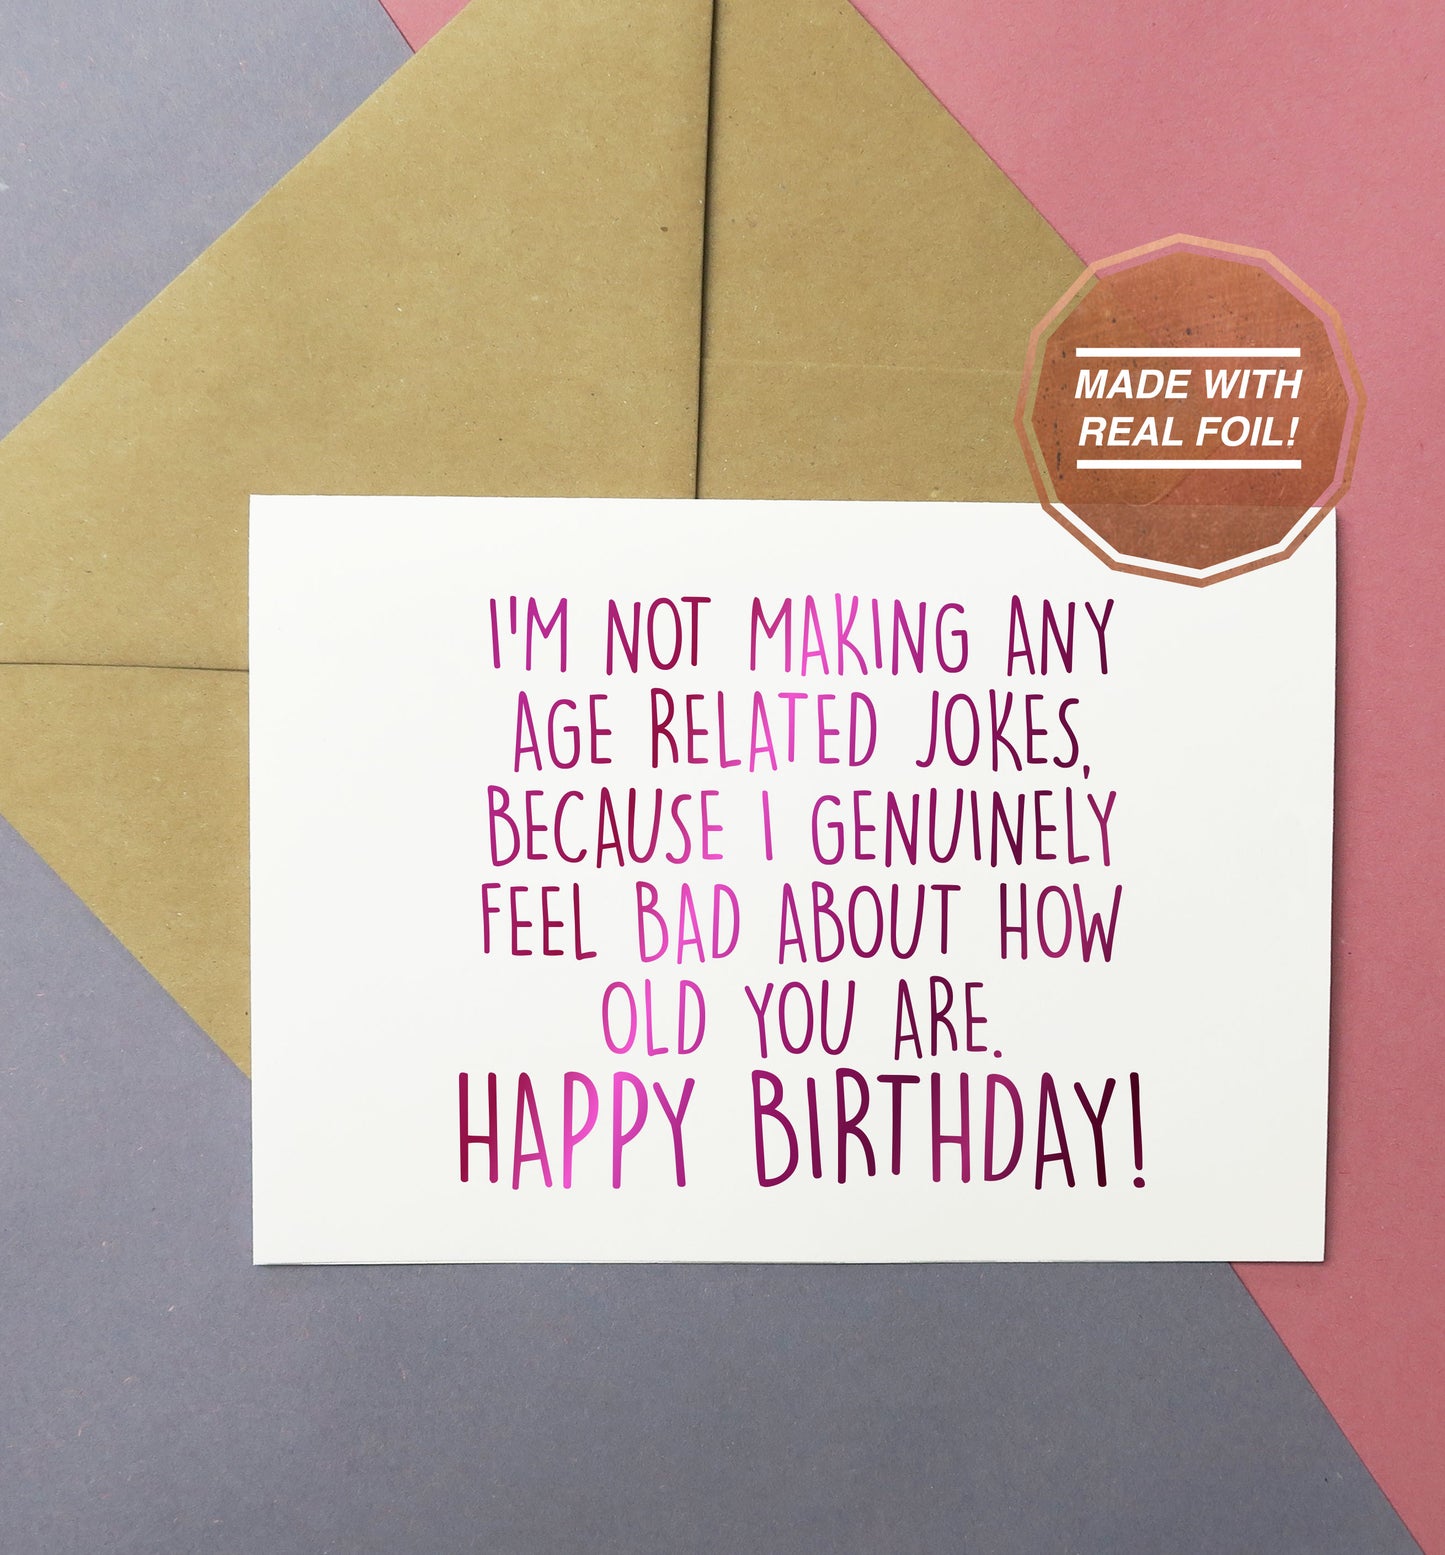 I'm not making any age related jokes because I genuinely feel bad for how old you are handmade birthday card